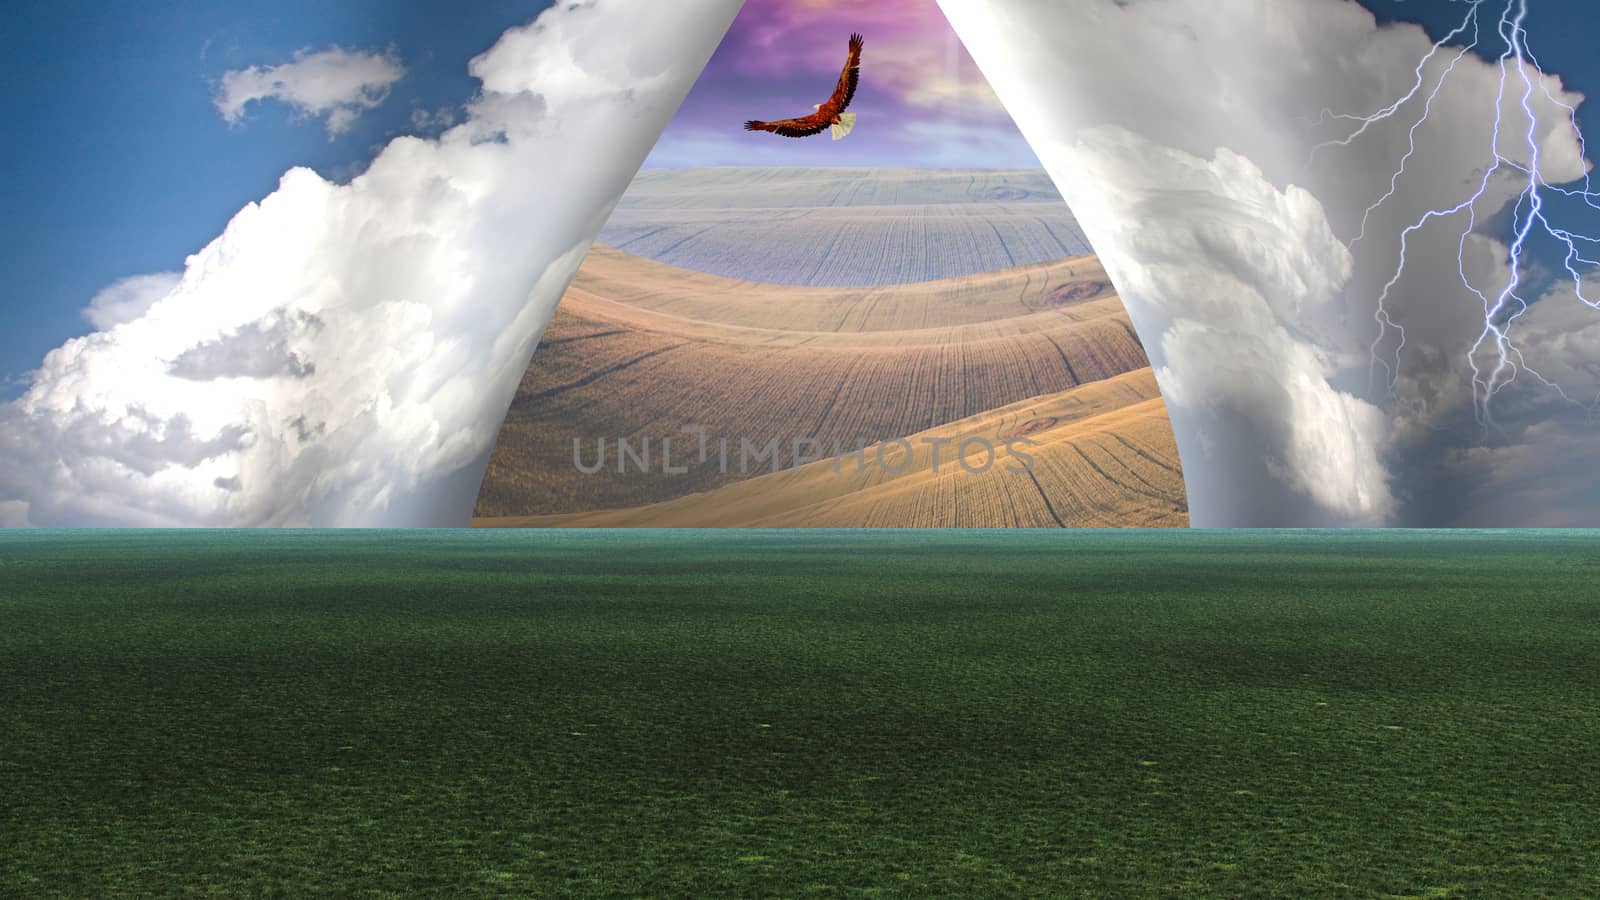 Sky pulled apart like curtain to reveal other landscape. 3D rendering